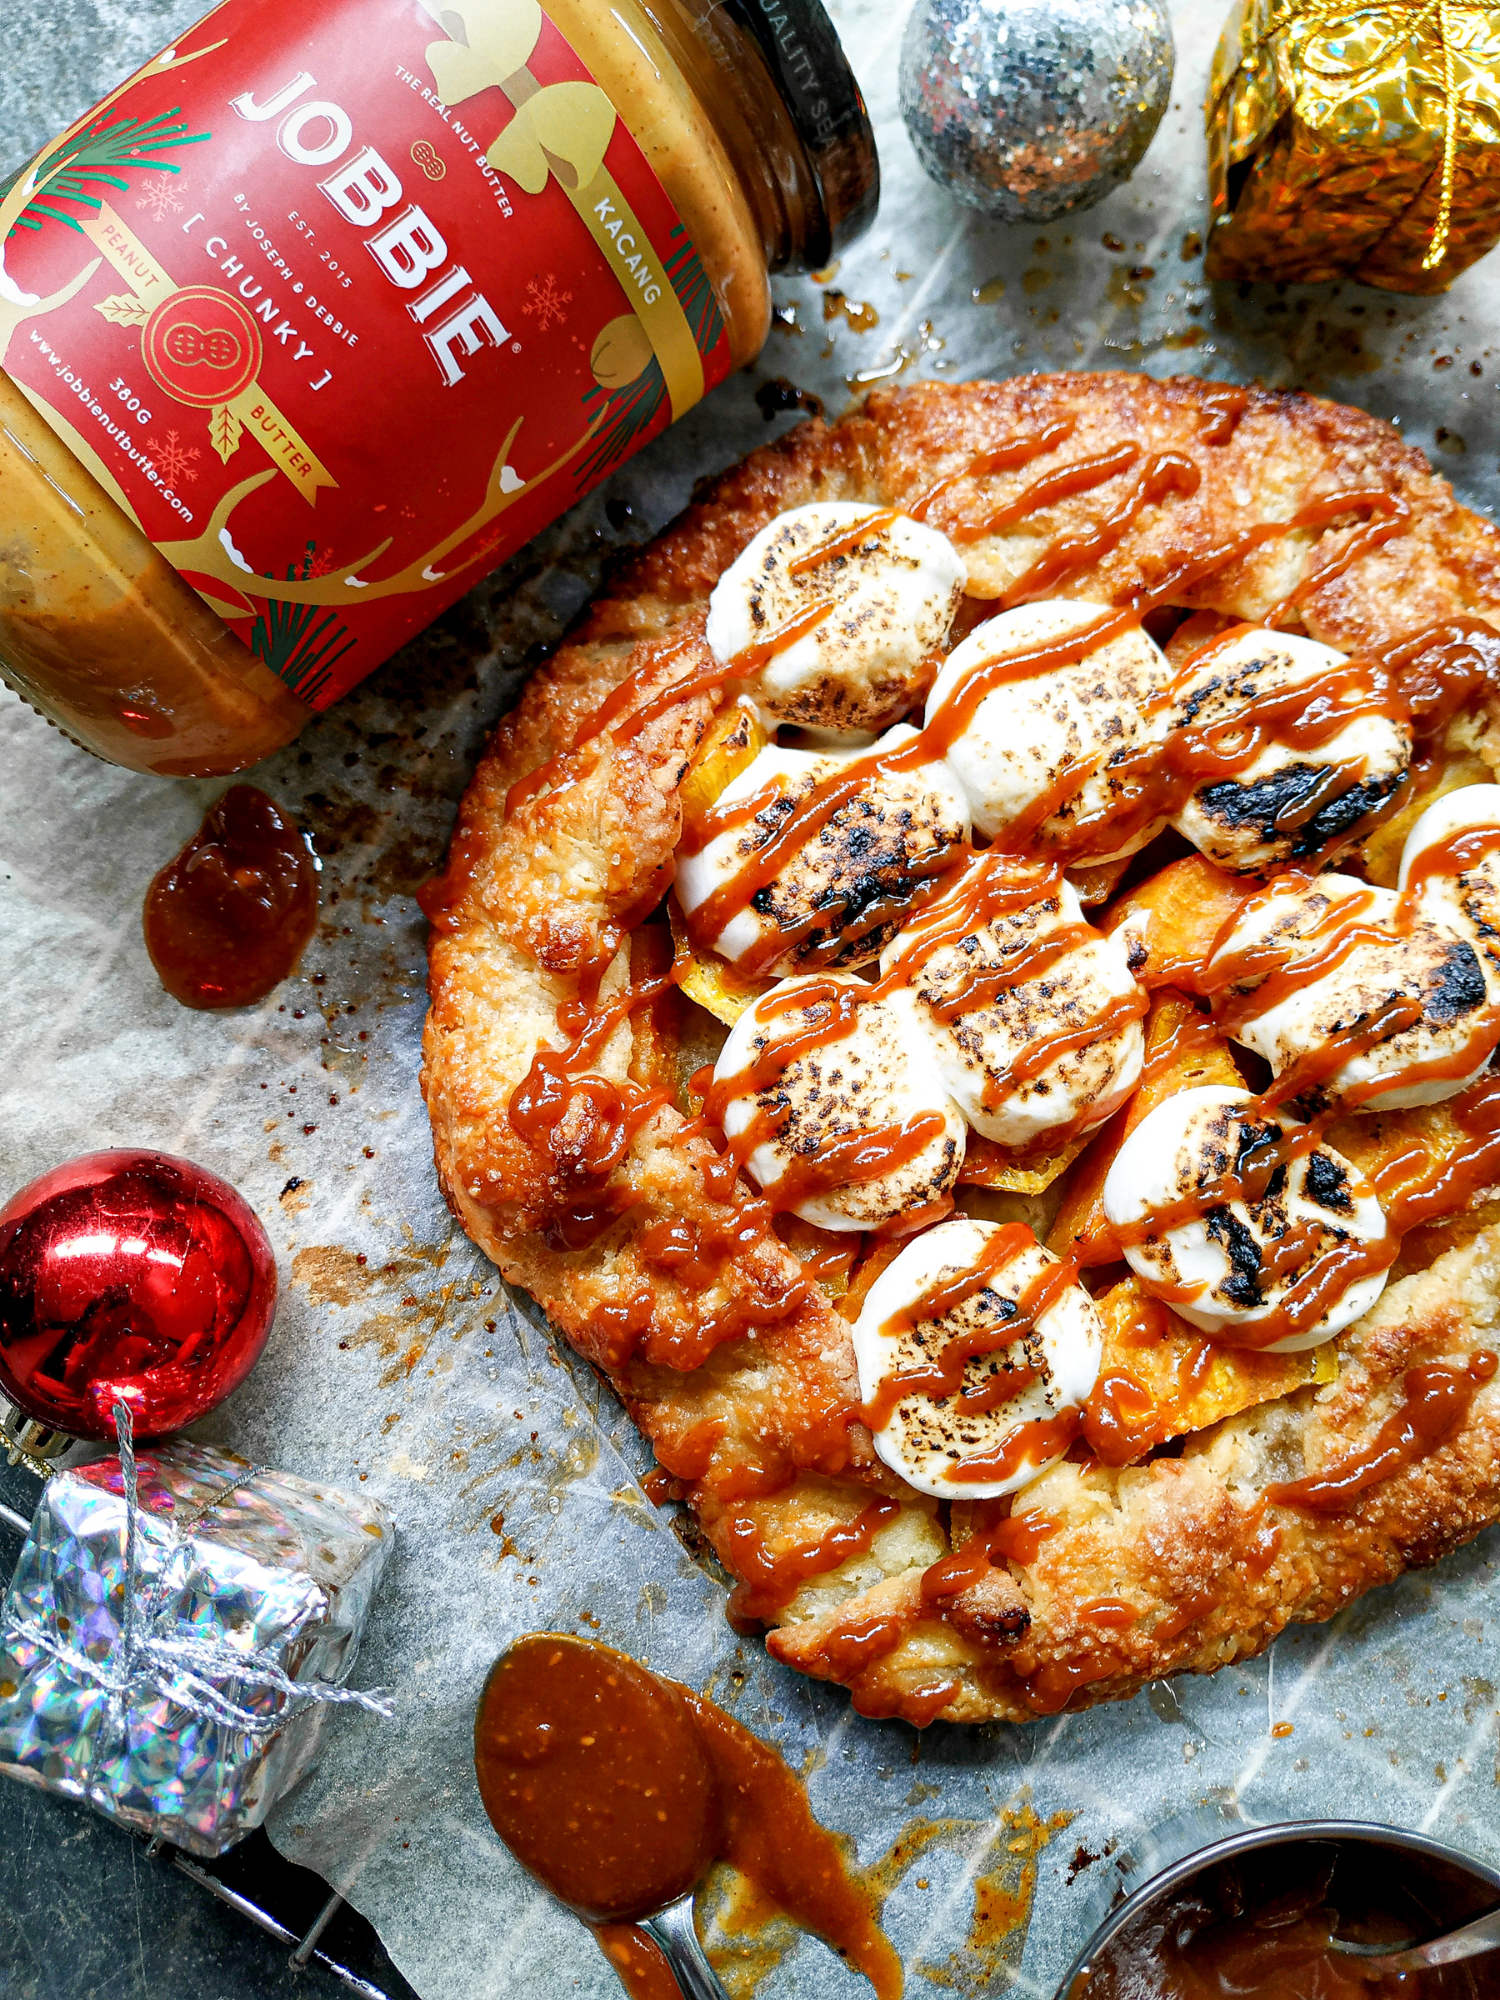 JOBBIE Peanut Butter Praline Galette with Sweet Potato and Marshmallows